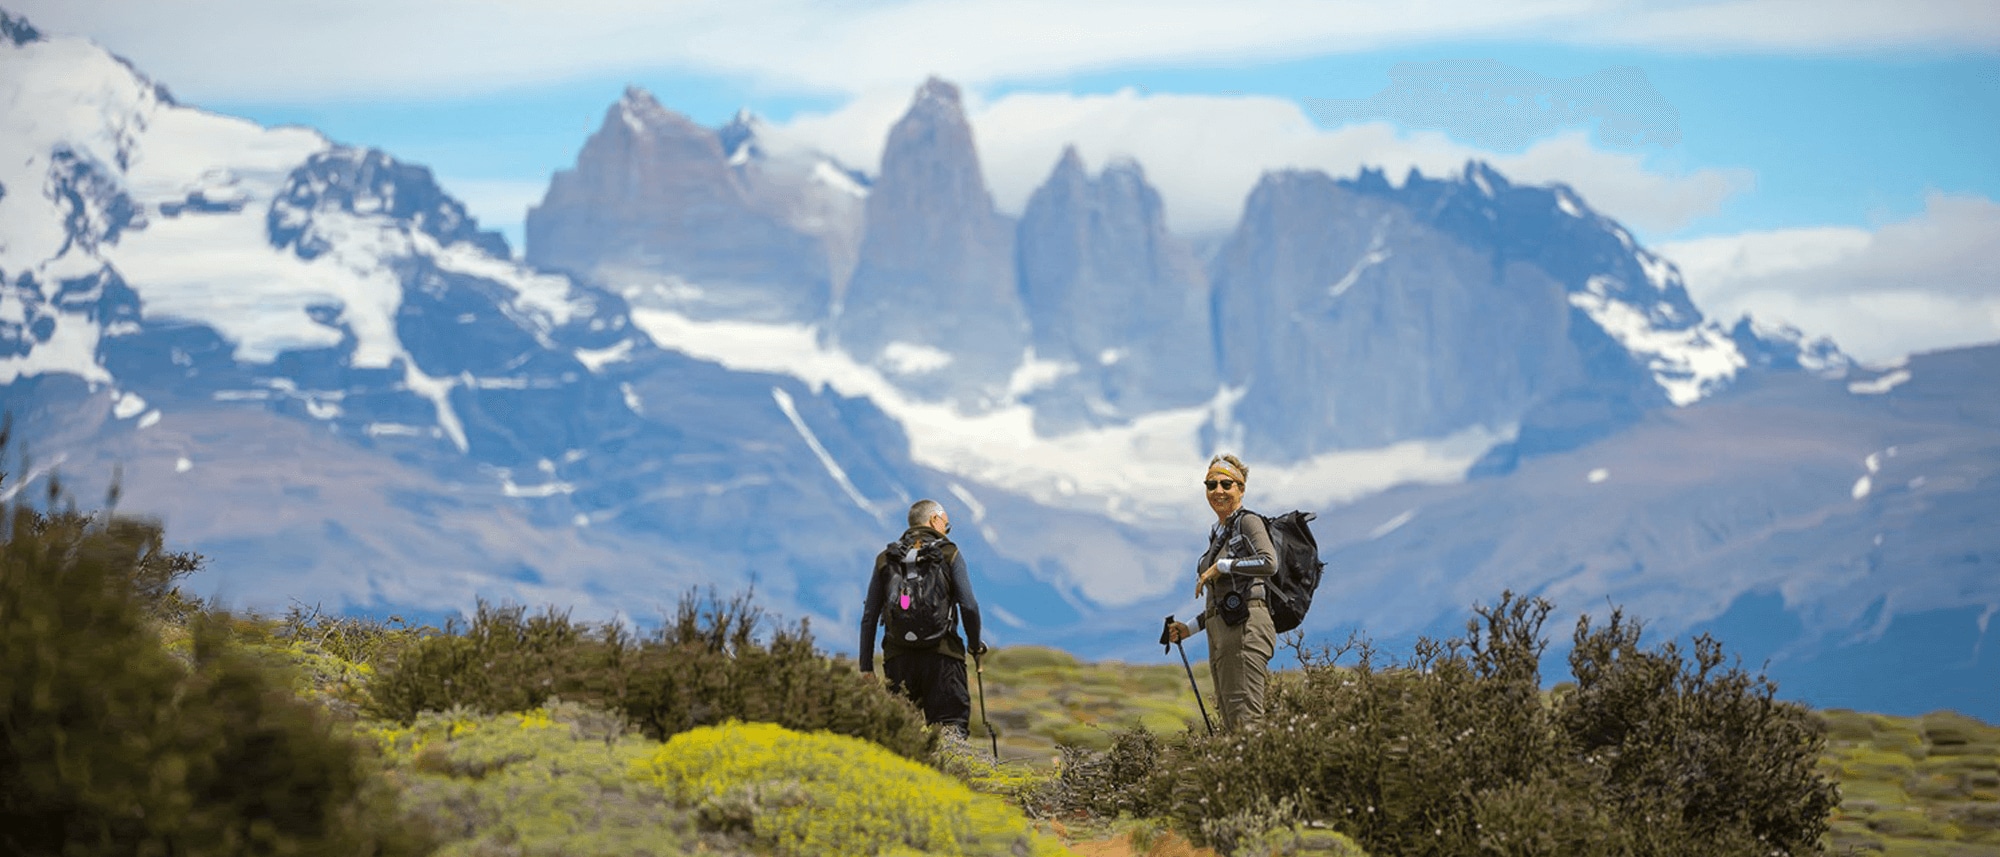 A couple on one of Tierra Patagonia's hiking adventure excursions with a breathtaking view behind them.